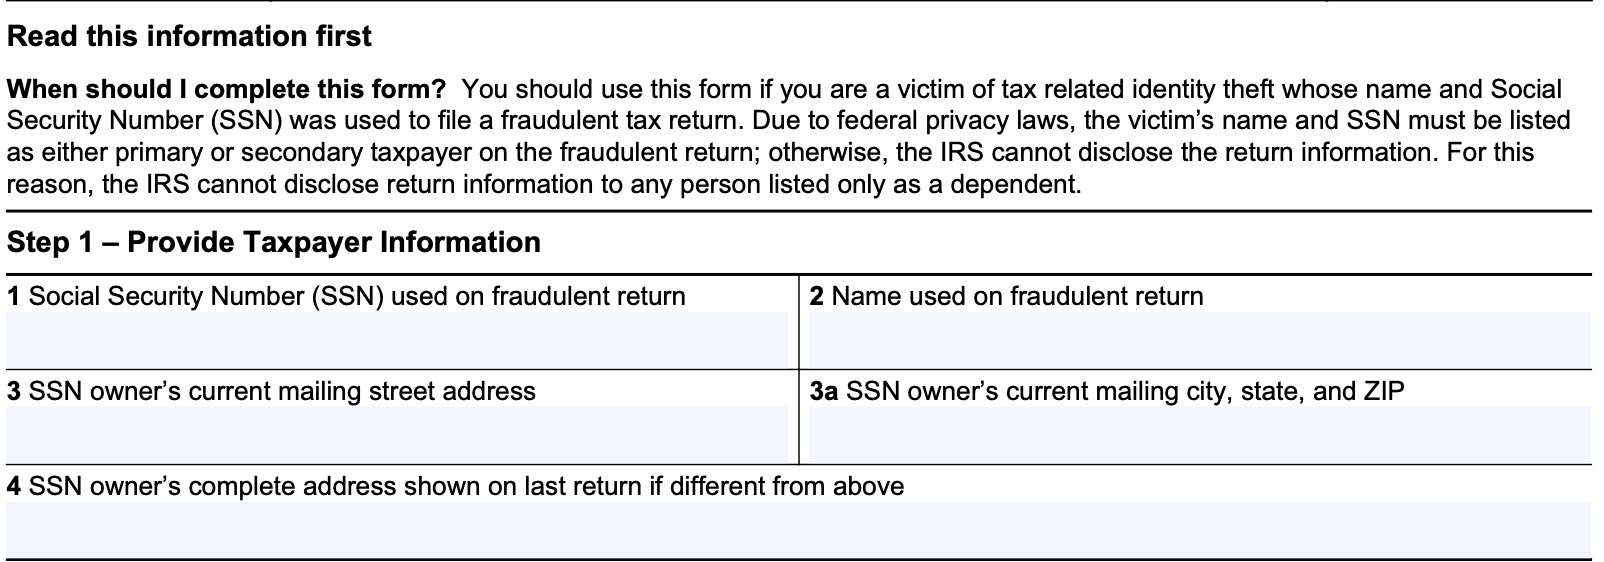 irs form 4506-f, step 1: provide taxpayer information